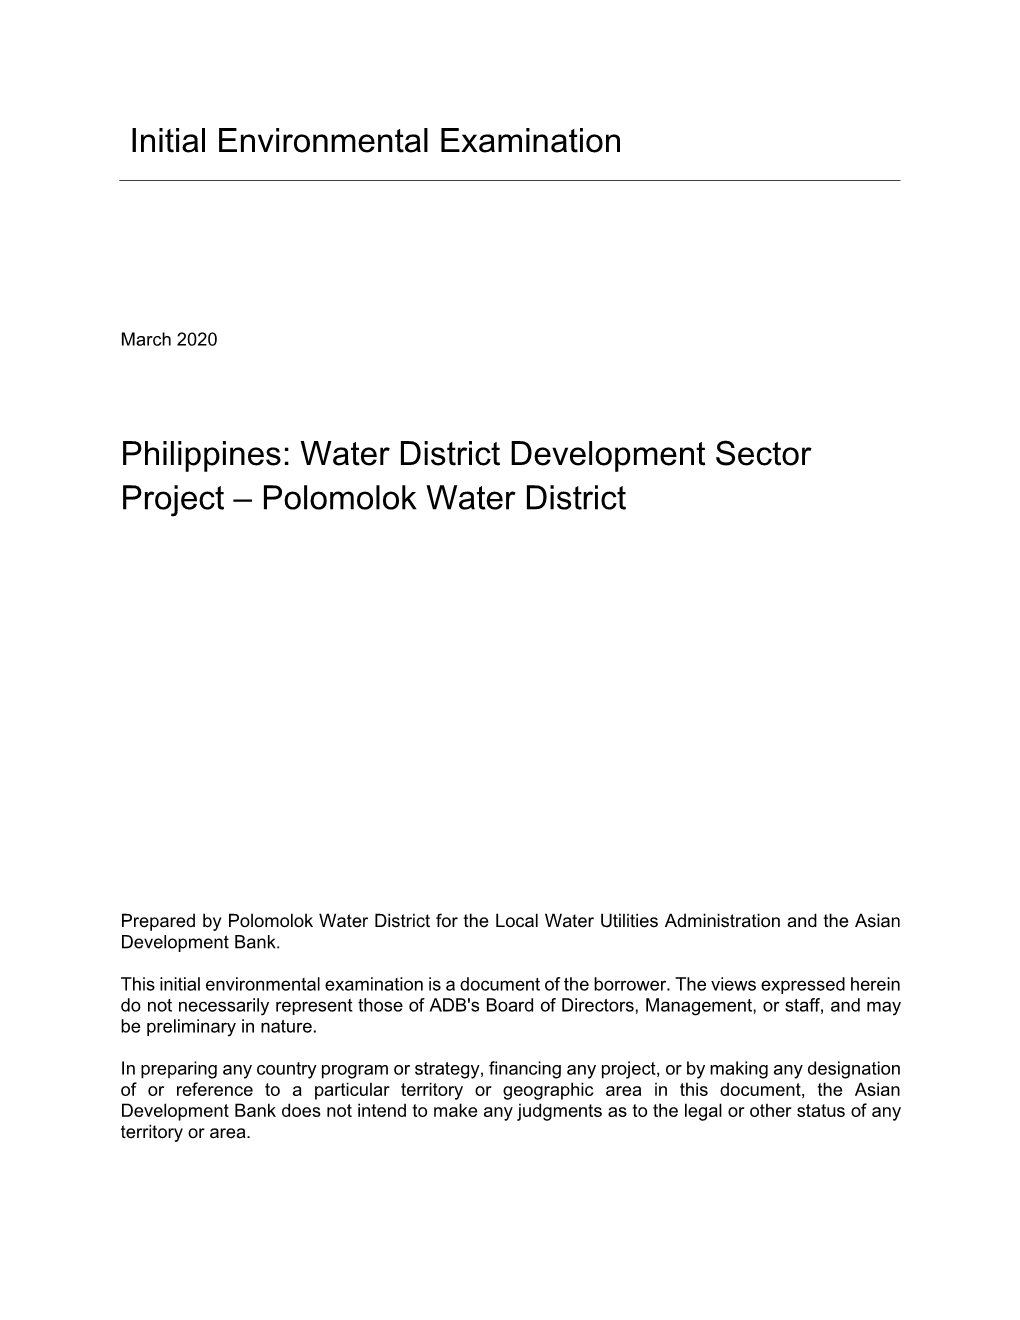 41665-013: Water District Development Sector Project